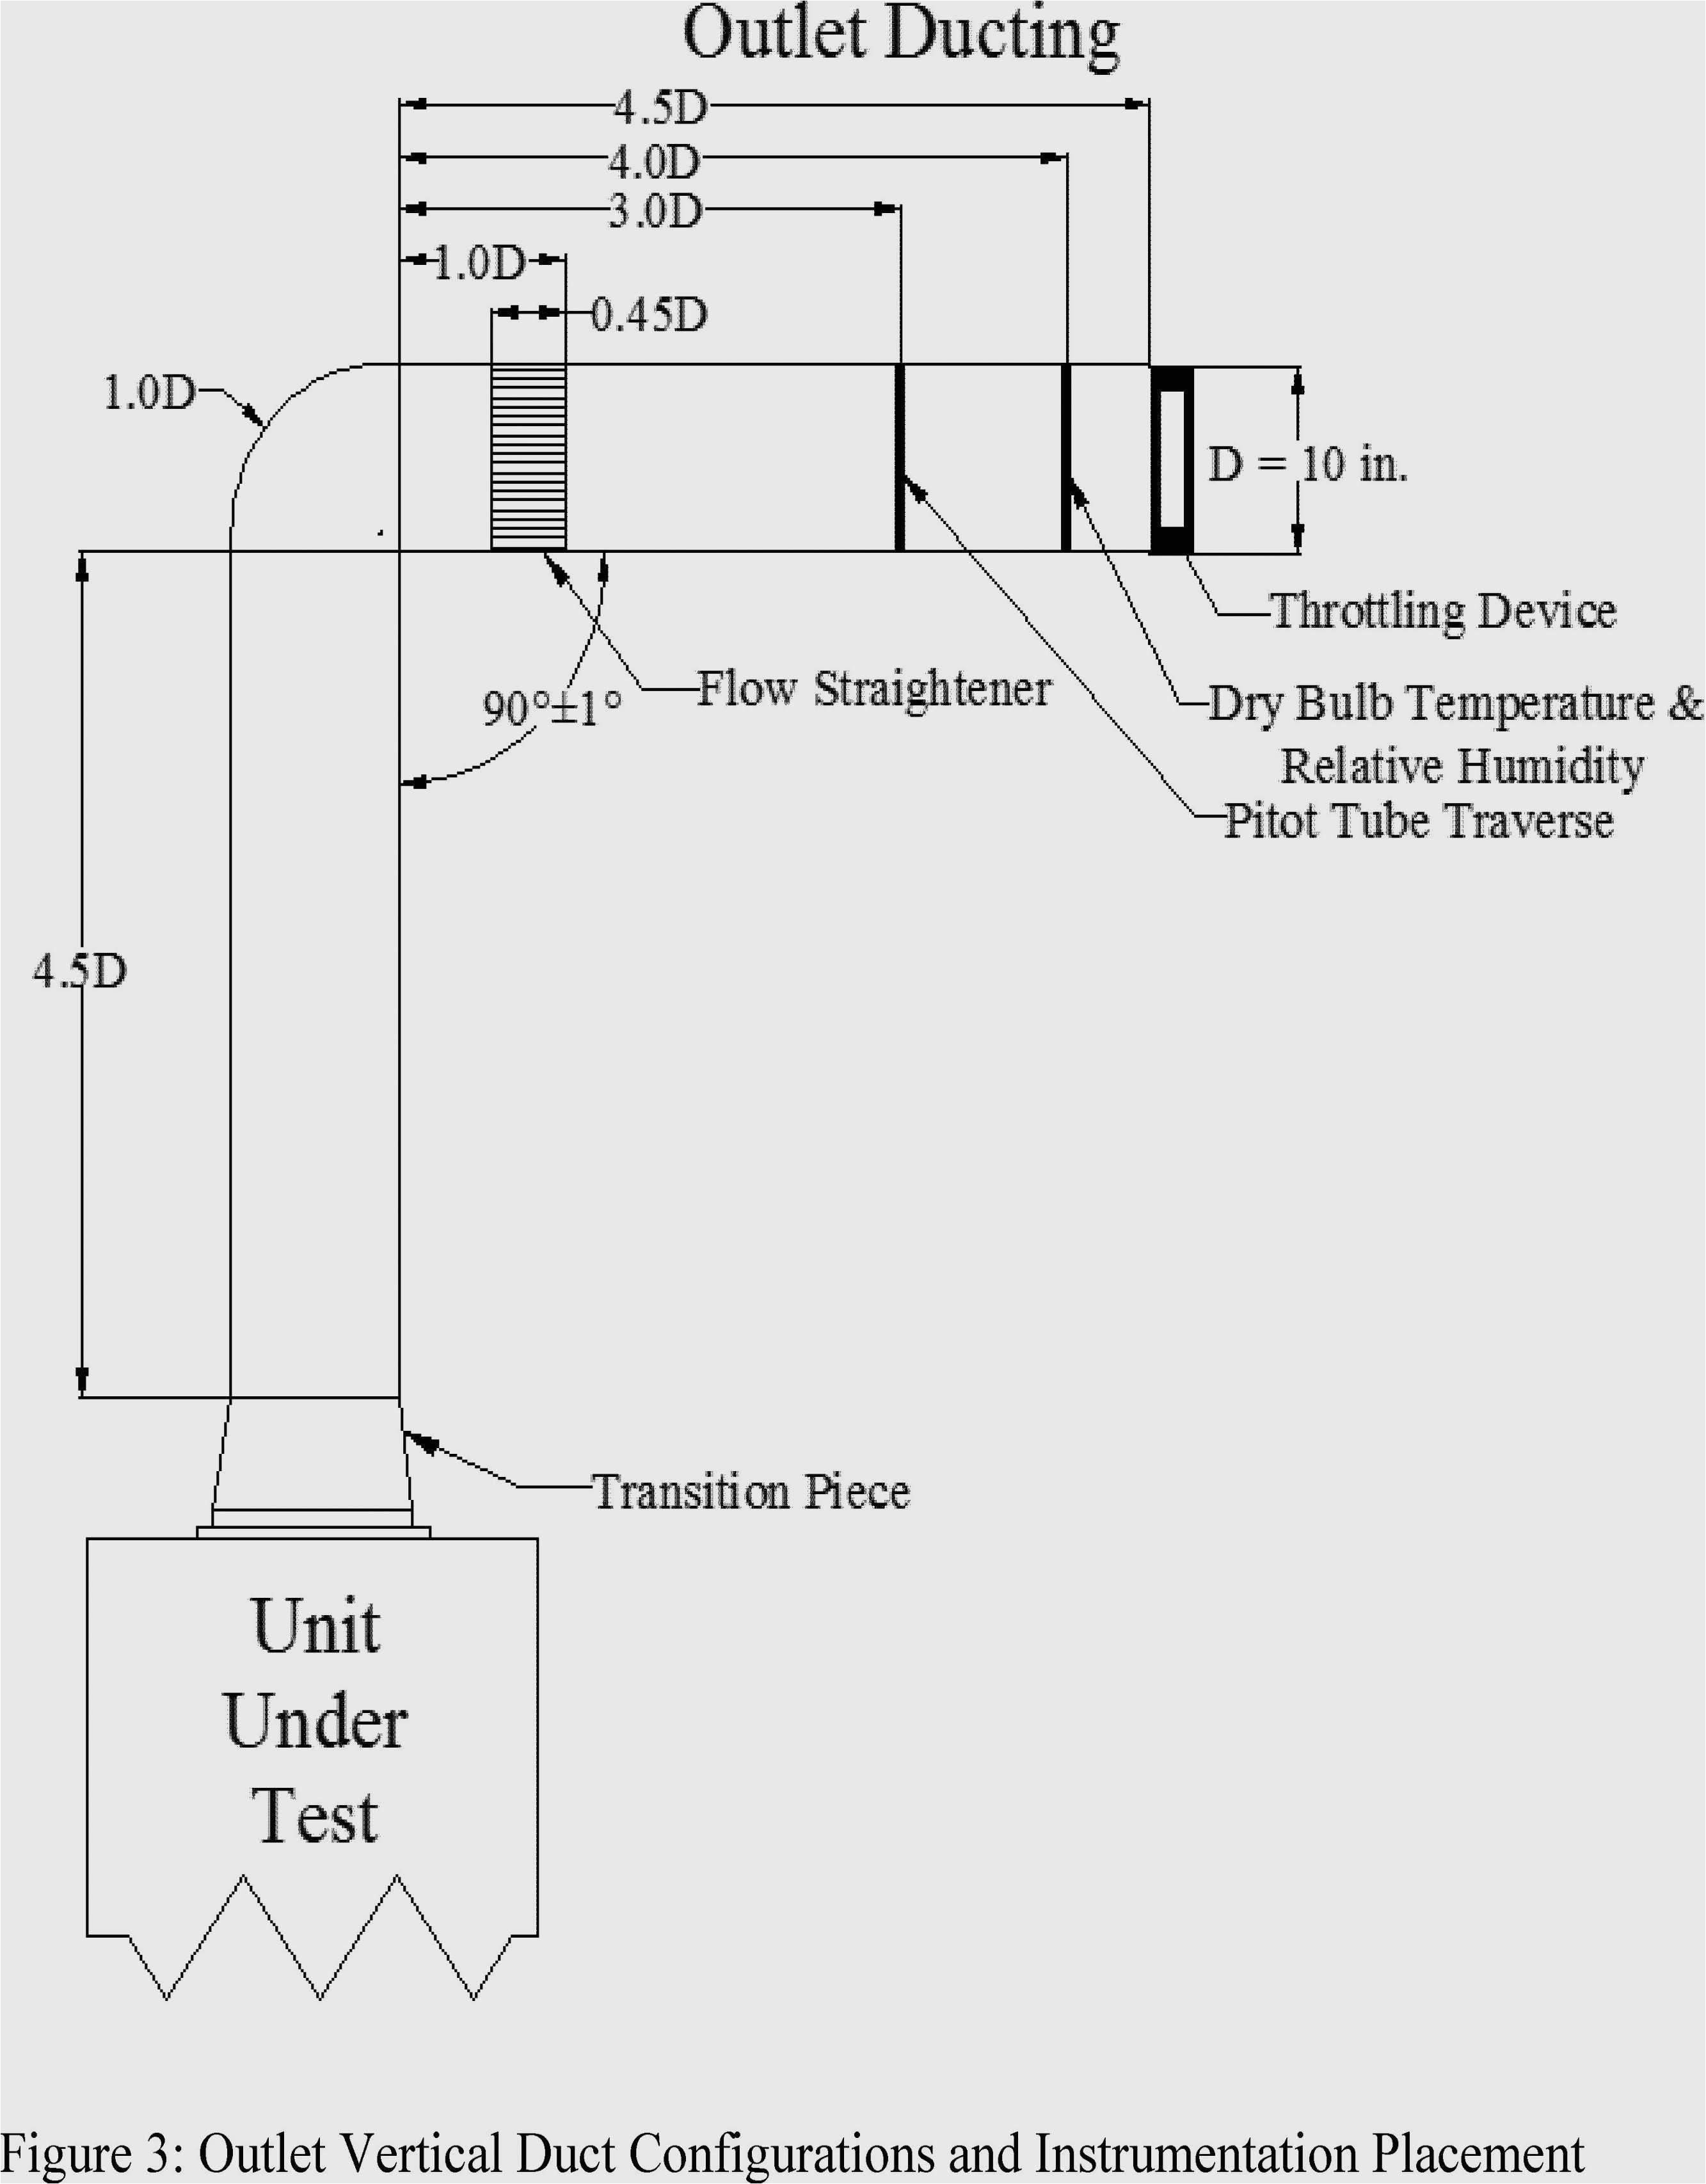 Wiring Diagram 4 Way Light Switch Electrical Wiring Diagram Two Way Switch Wiring Diagram Database